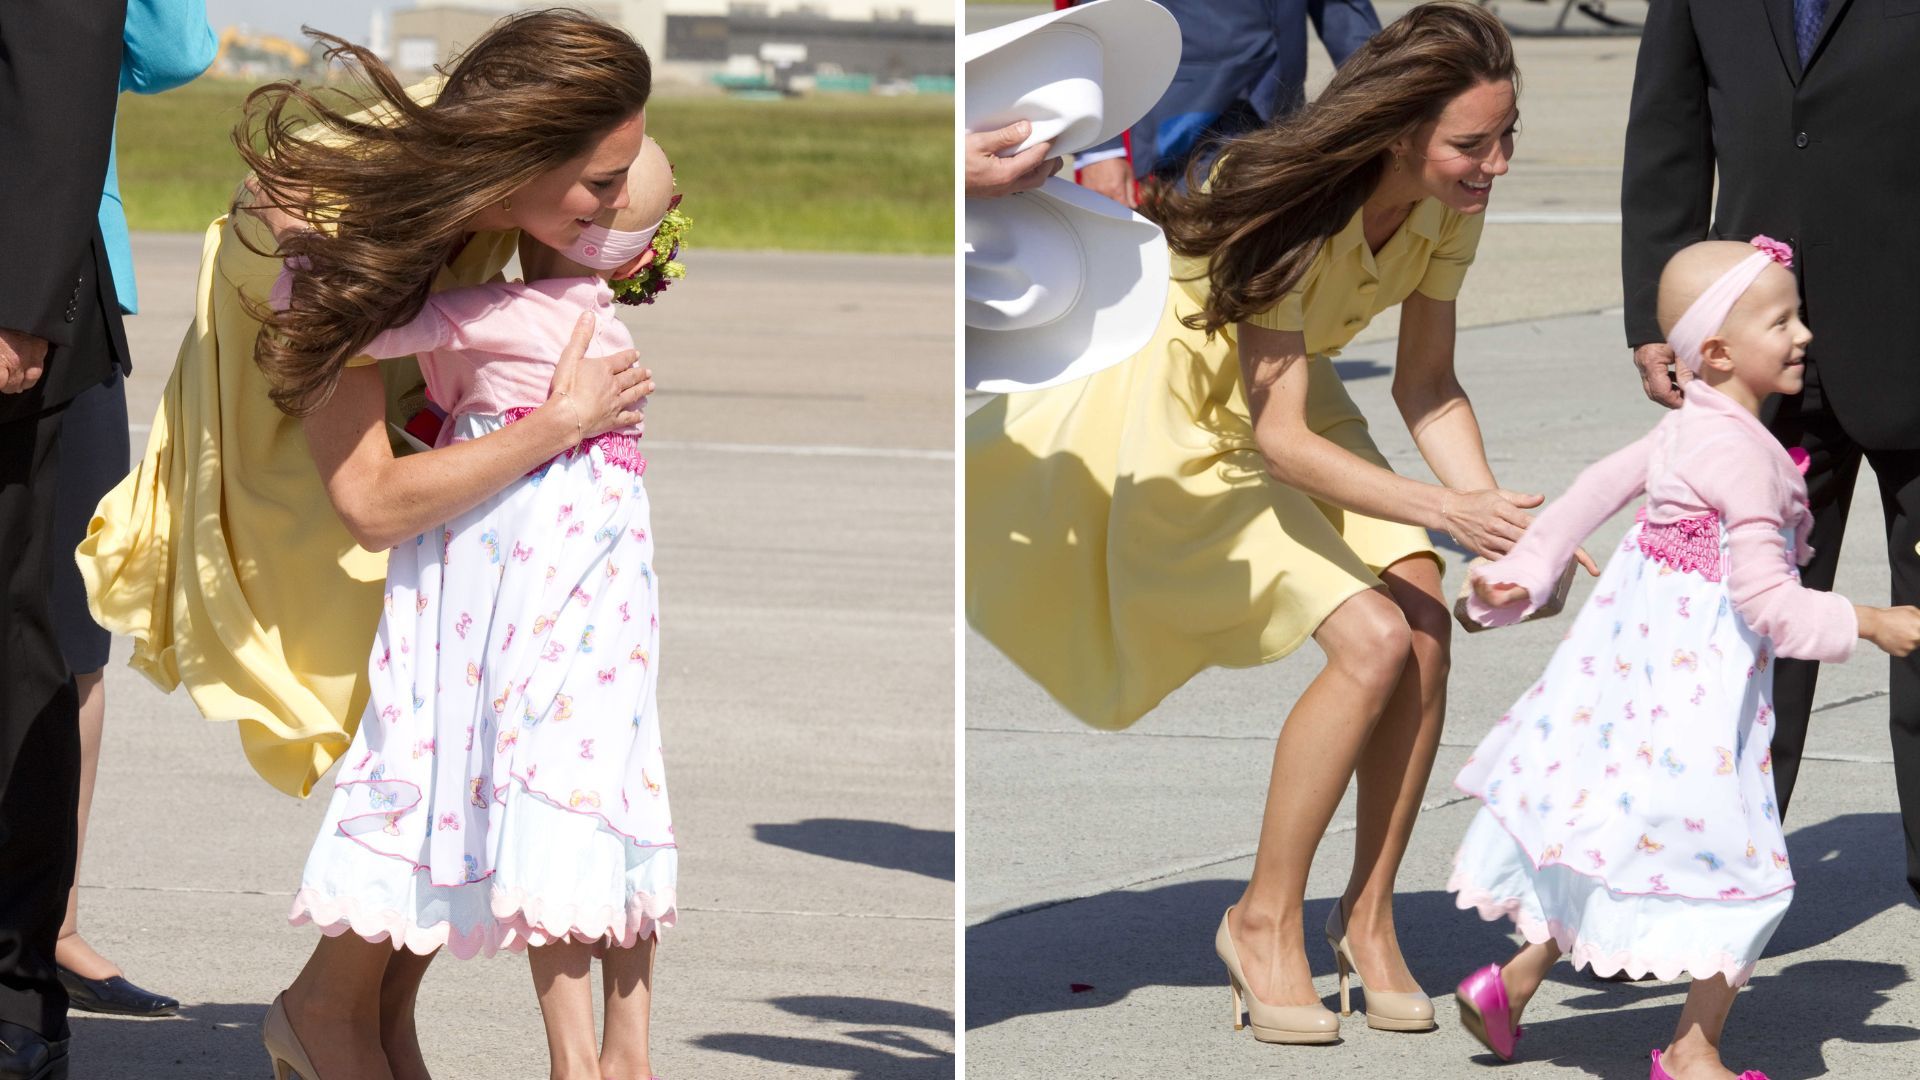 <p>                     On their first tour together in 2011, William and Kate were riding high on the worldwide attention their wedding received in April of the same year.                   </p>                                      <p>                     Such was the reach of their fairy tale that little girls like Diamond Marshall became obsessed with the real life story of a Princess (well, Duchess at the time, but let's not split hairs over heirs).                   </p>                                      <p>                     The young fan, named Diamond Marshall, who was dealing with chemotherapy treatments, got to meet William and Kate as they arrived in North America.                   </p>                                      <p>                     After their sweet moment together, which saw William and Kate both hug and chat with the girl, giving her plenty of extra time and attention despite the busy itinerary, Mrs Marshall said (per <a href="https://www.mirror.co.uk/news/uk-news/kate-middleton-touching-moment-sick-182924">The Mirror</a>), "Kate was lovely... they were gracious and spent extra time with her... For a little girl who dreams everything princess, it was a dream come true."                   </p>